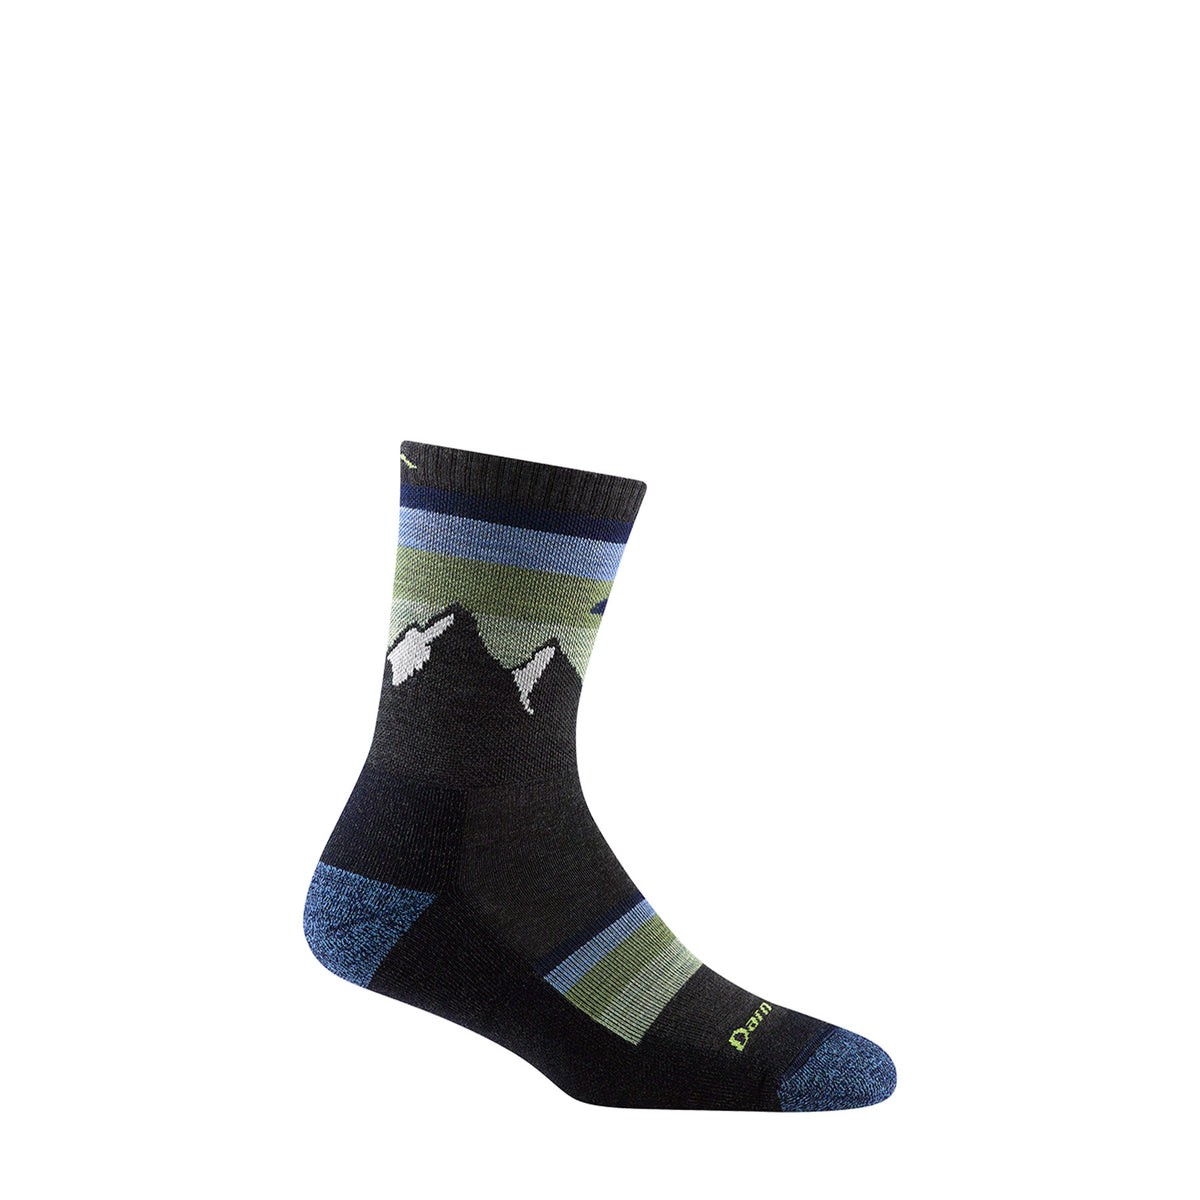 Hero image featuring Darn Toughs Women's Sunset Ledge Micro Crew hiking sock in charcoal with blue, dark green, and light green stripes across the top and navy blue heal and toe patches.